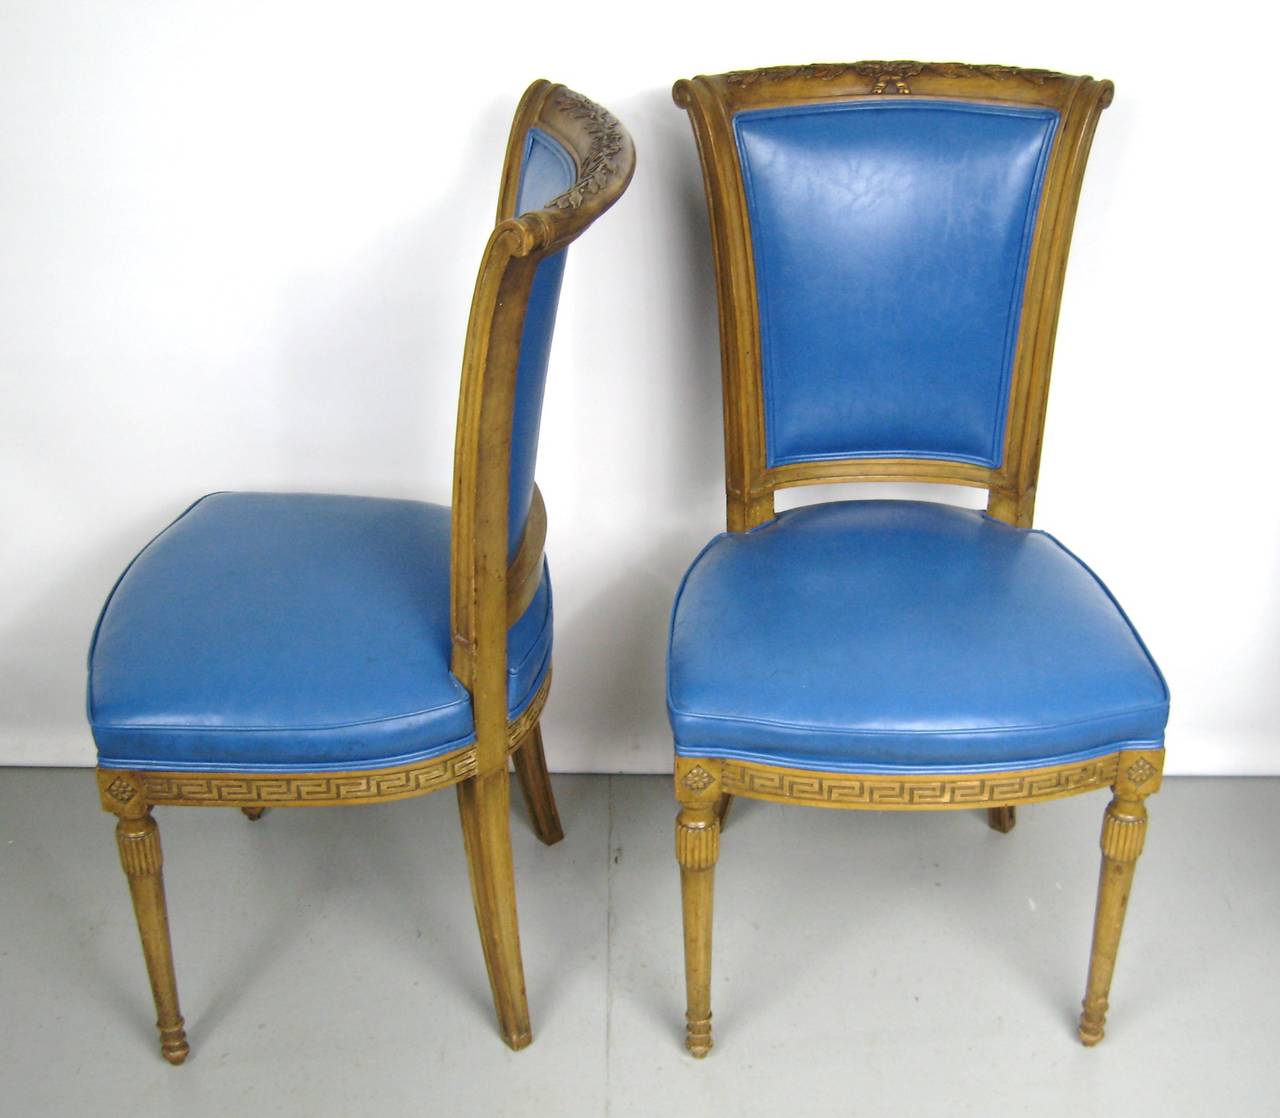 Two blue Italian Louis XVI neoclassical style chairs. The color on these is stunning. They measure 37 in H 23 in D 18.25 in wide, Seat height 18.5 in. We have a pair of captain chairs on our storefront that will go great with these. Please be sure